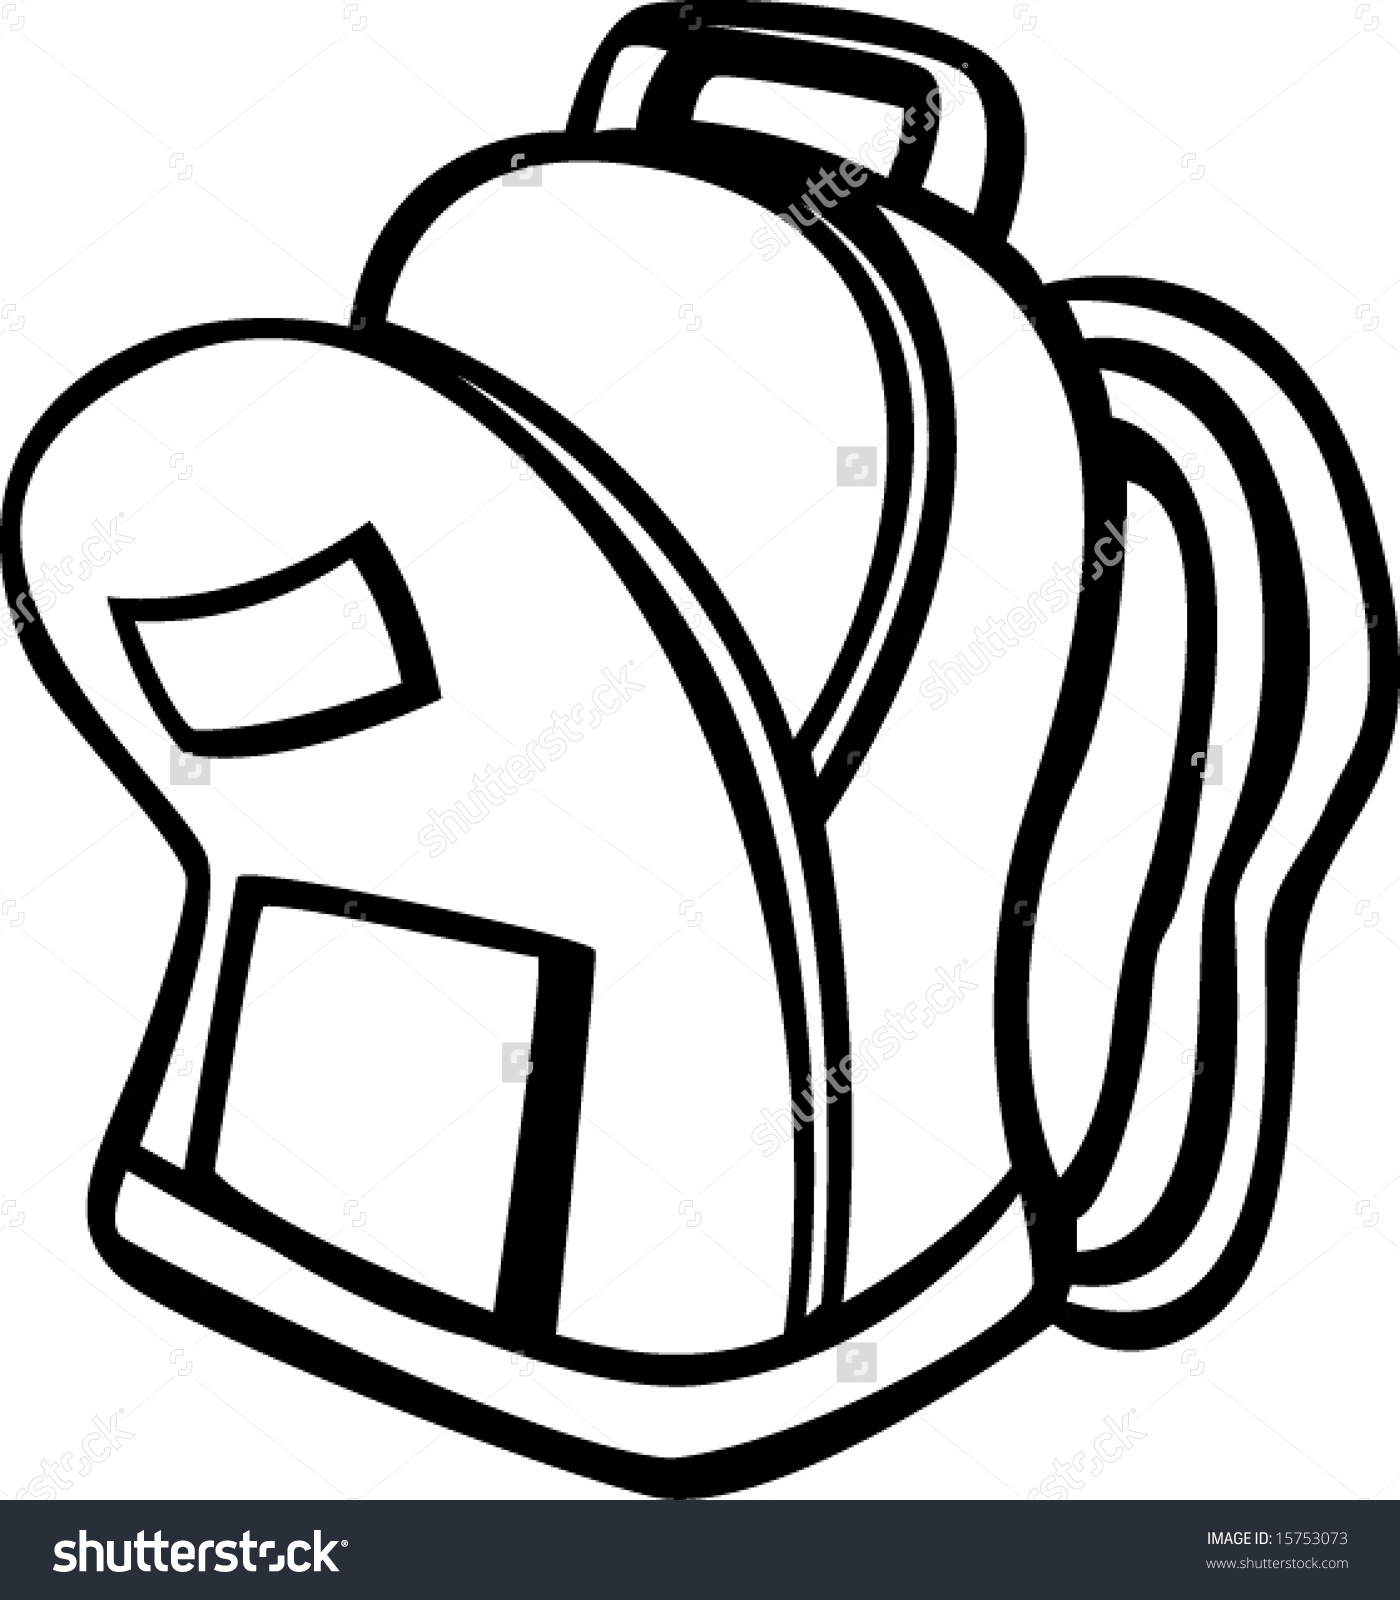 Open backpack clipart